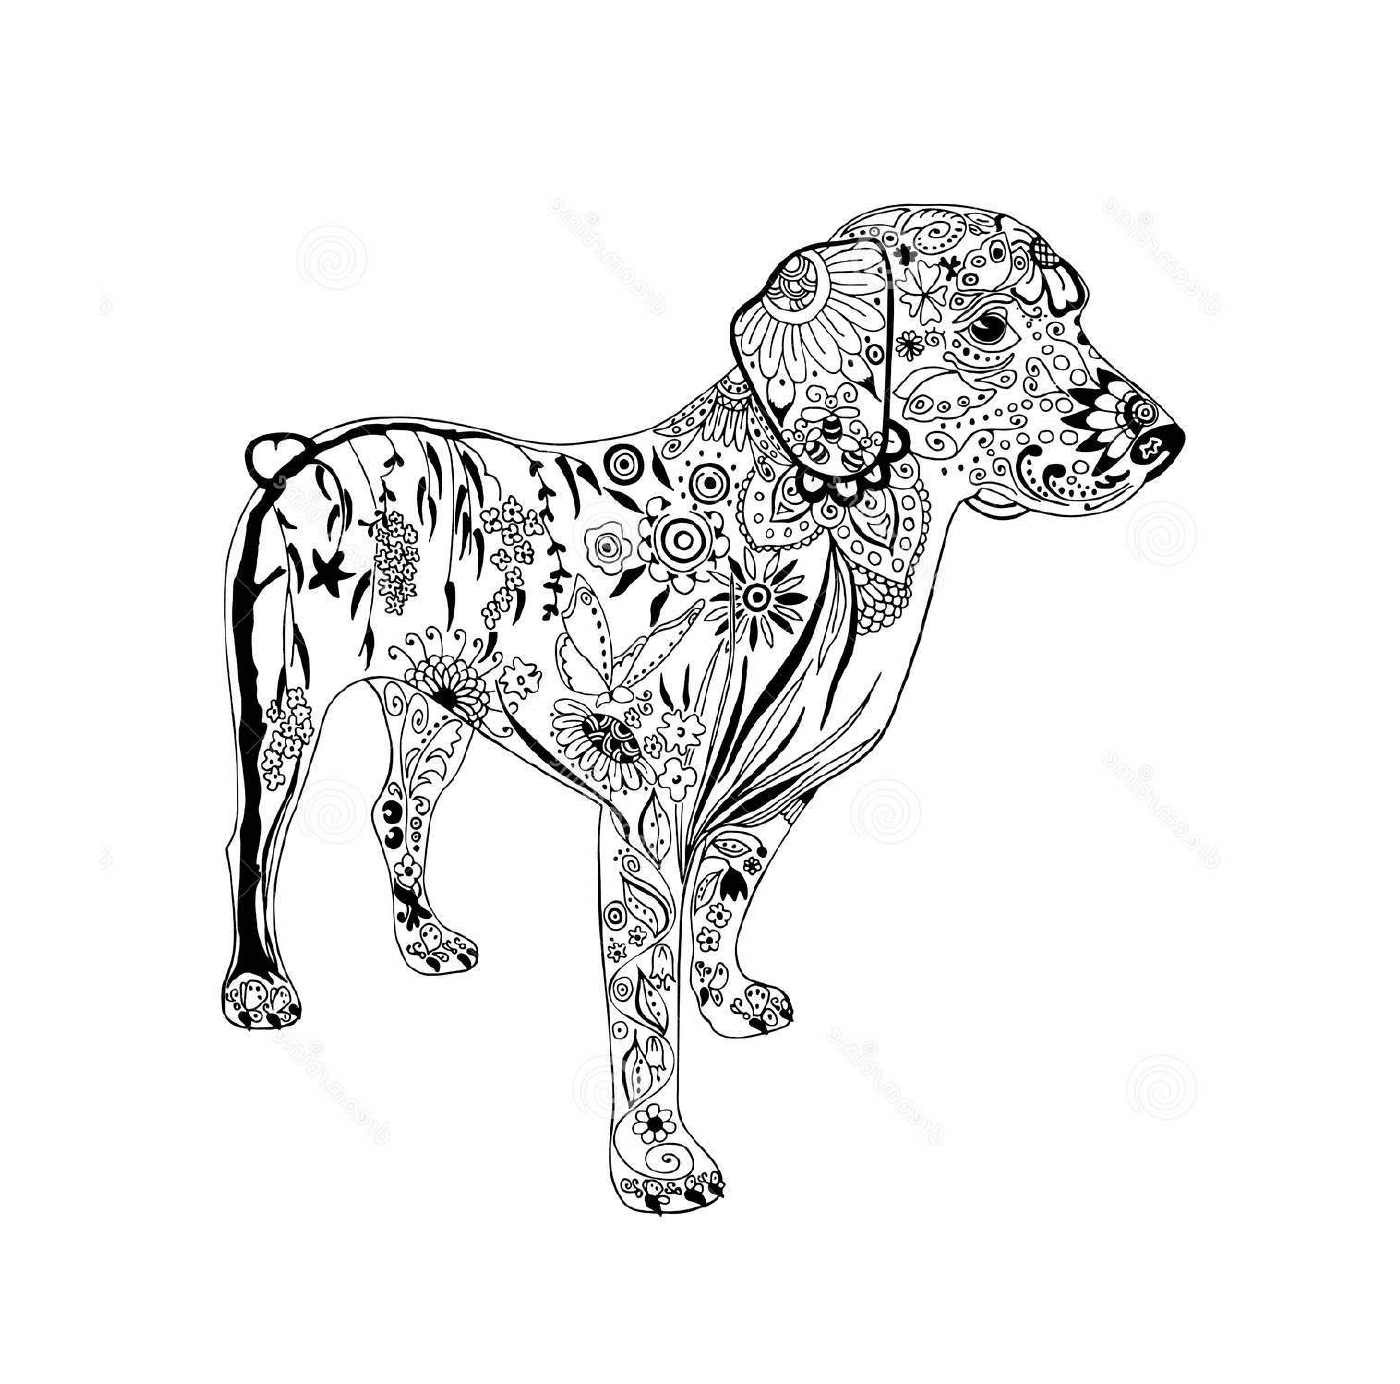  Dog with doodle and zentangle motifs 